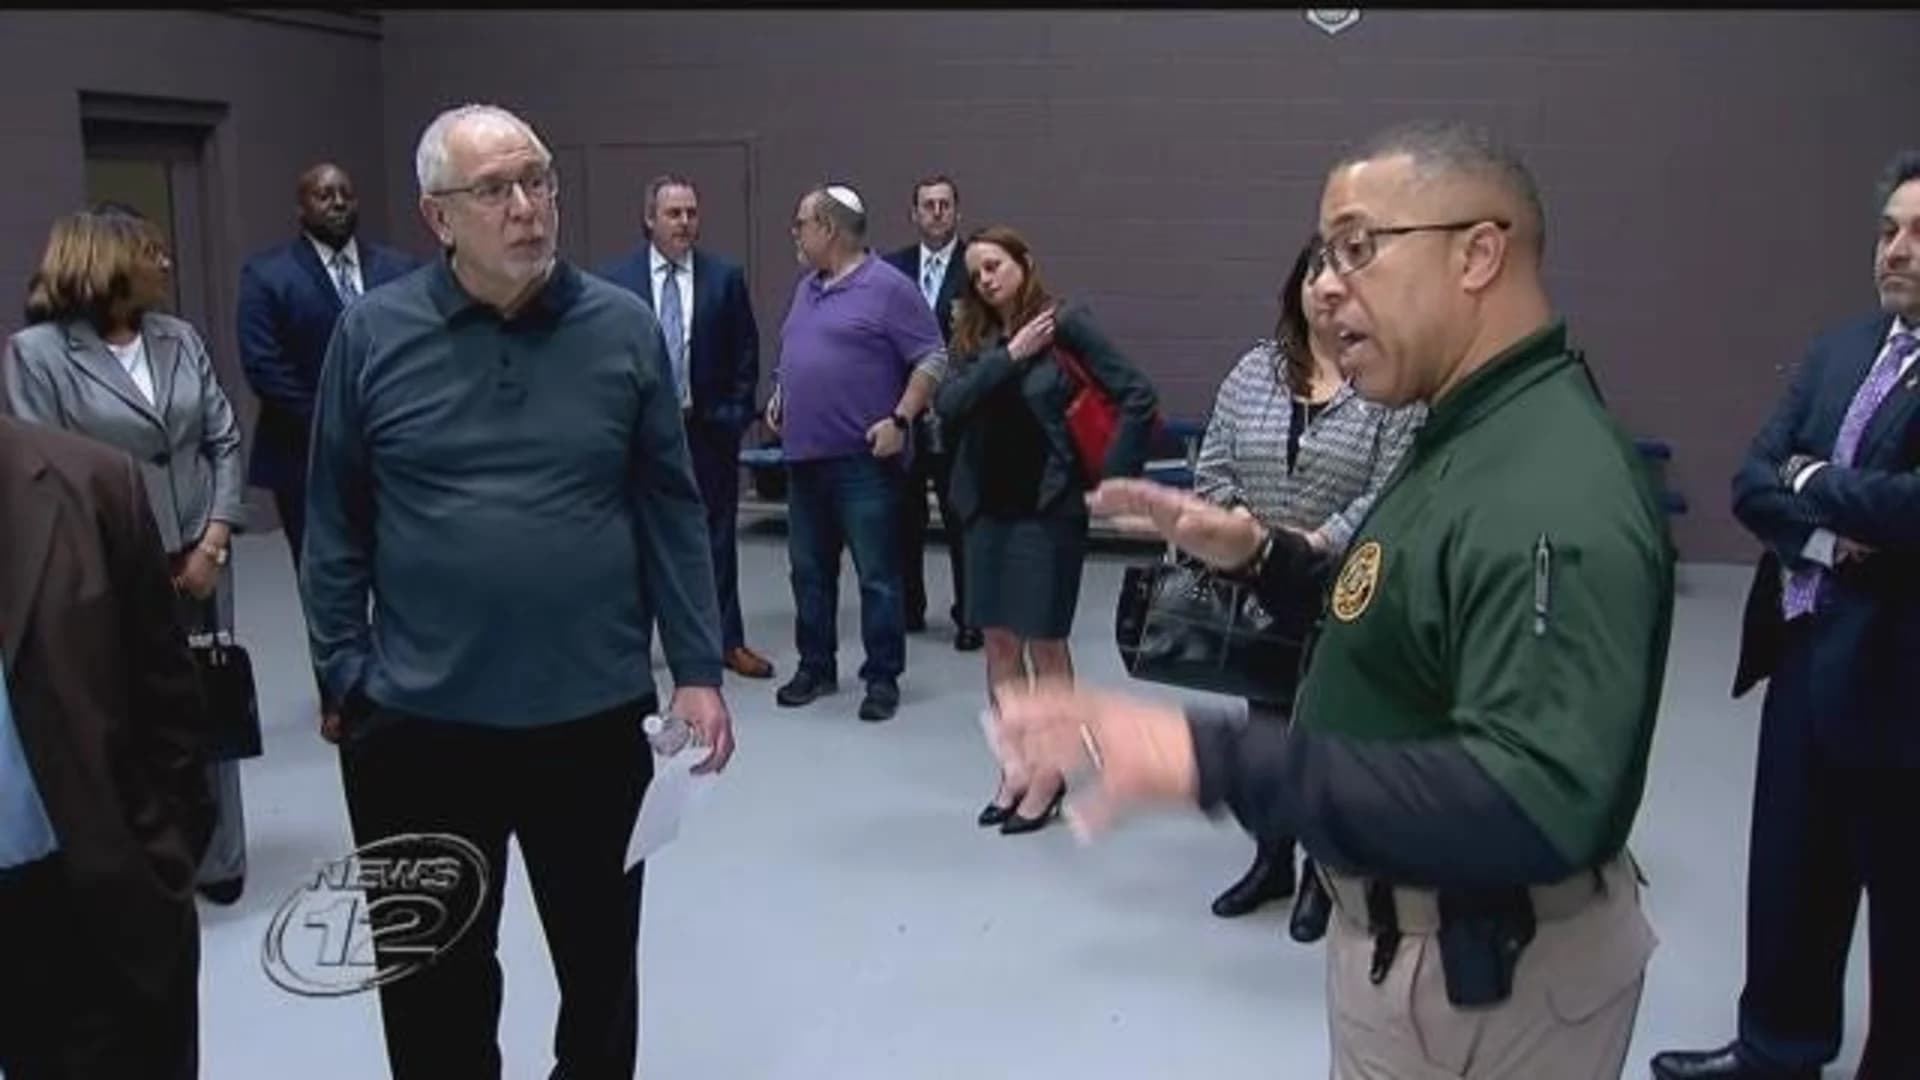 Community leaders partake in police training to better understand law enforcement